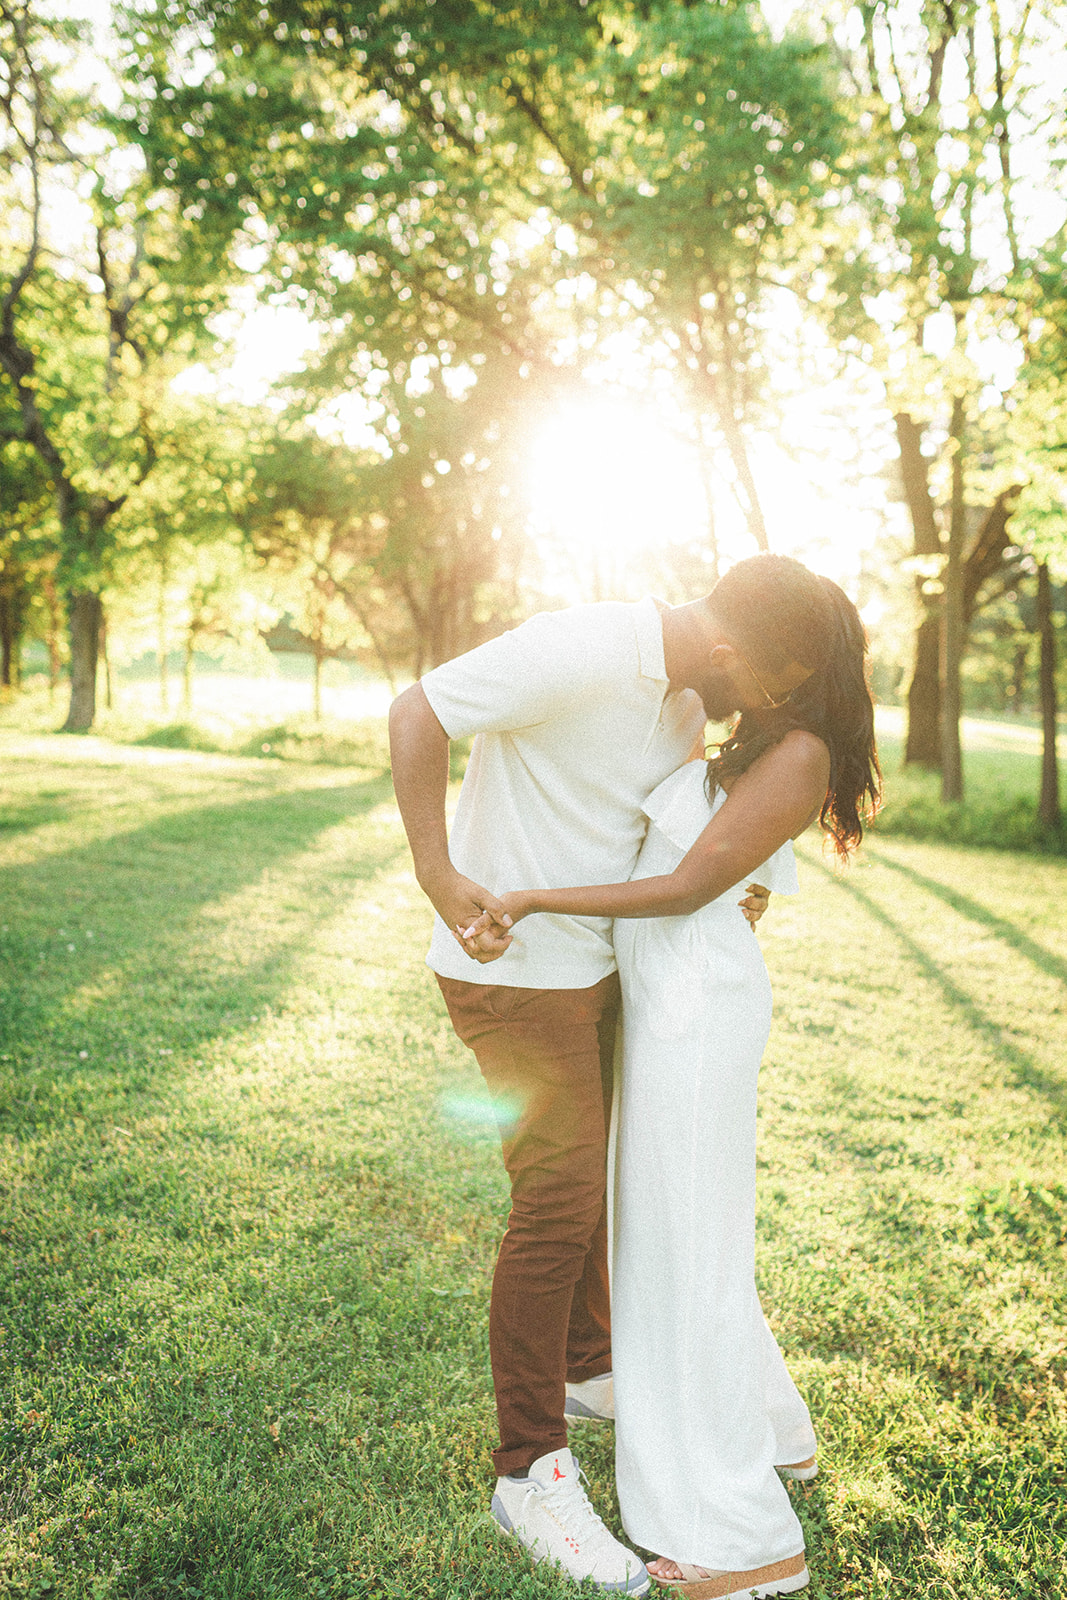 A loving couple embraces in a photo session at Percy Warner Park in Nashville, capturing romance against the scenic backdrop, featuring the iconic Parthenon.